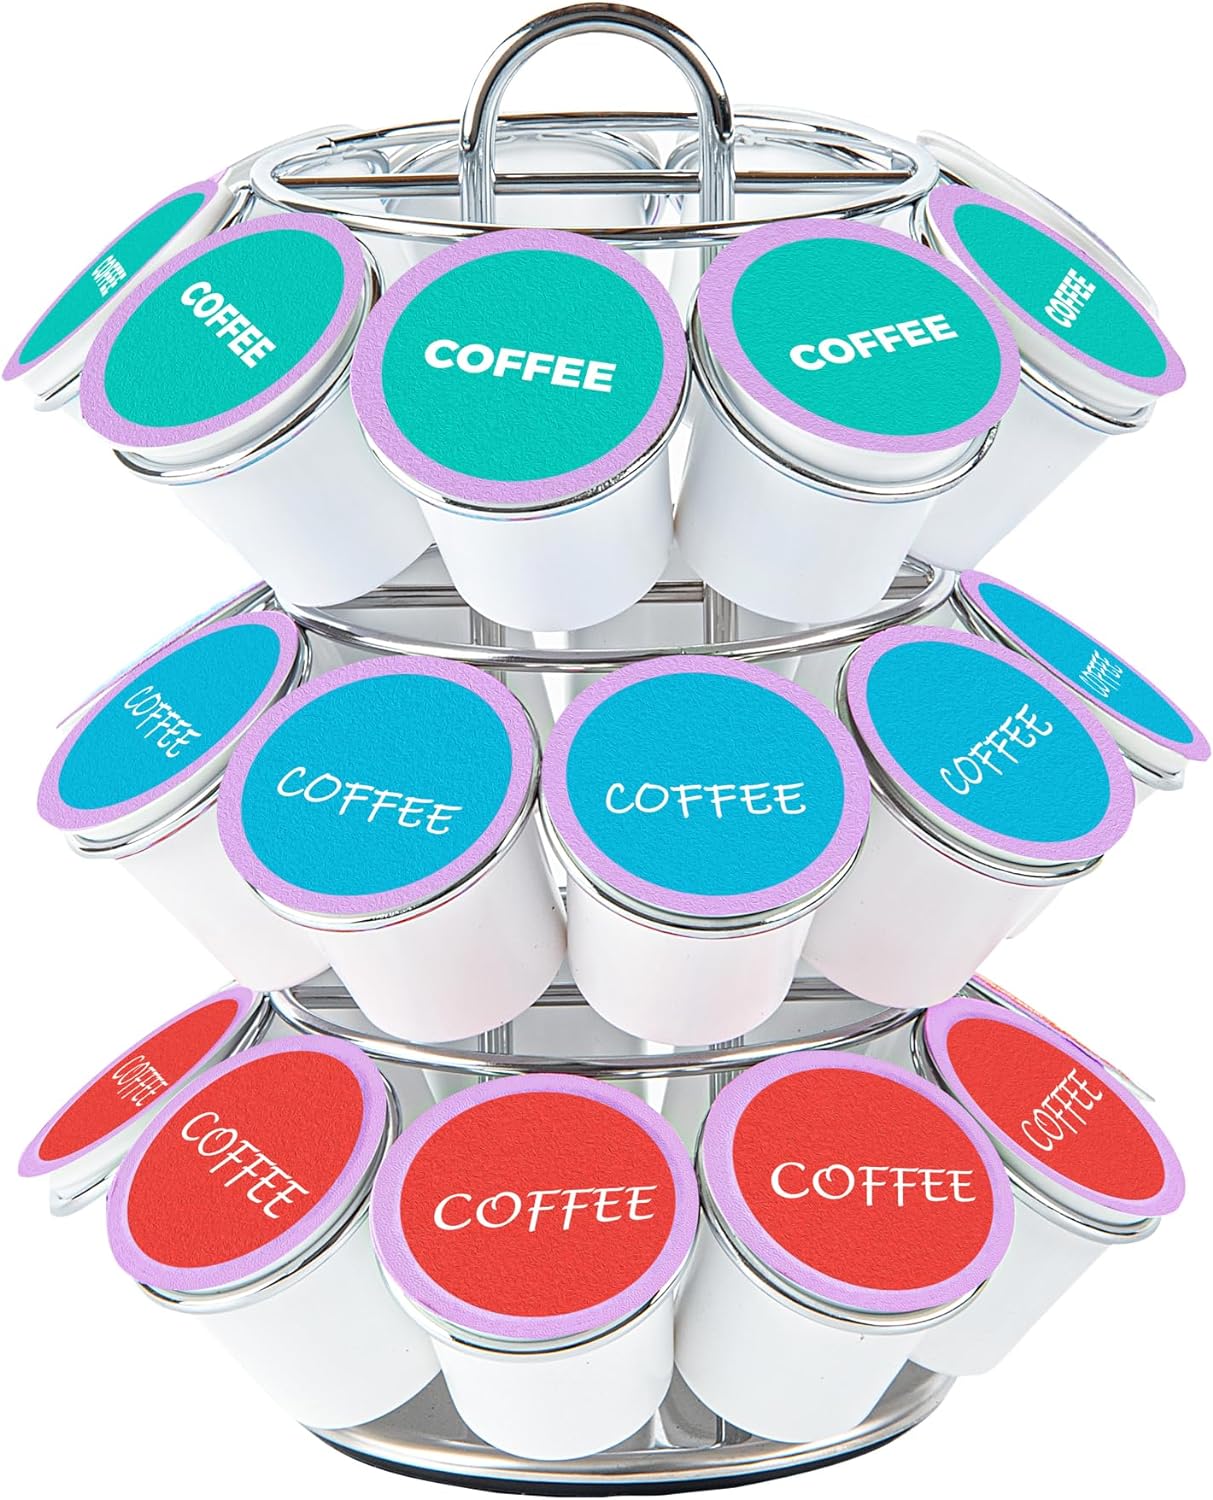 Restaurantware Restpresso 6.7 x 8.7 Inch Coffee Capsule Holder 1 Durable Pod Carousel – Holds 27 K-Cups 360-Degree Rotatable Iron Espresso Pod Organizer Mesh Tray Pods Not Included